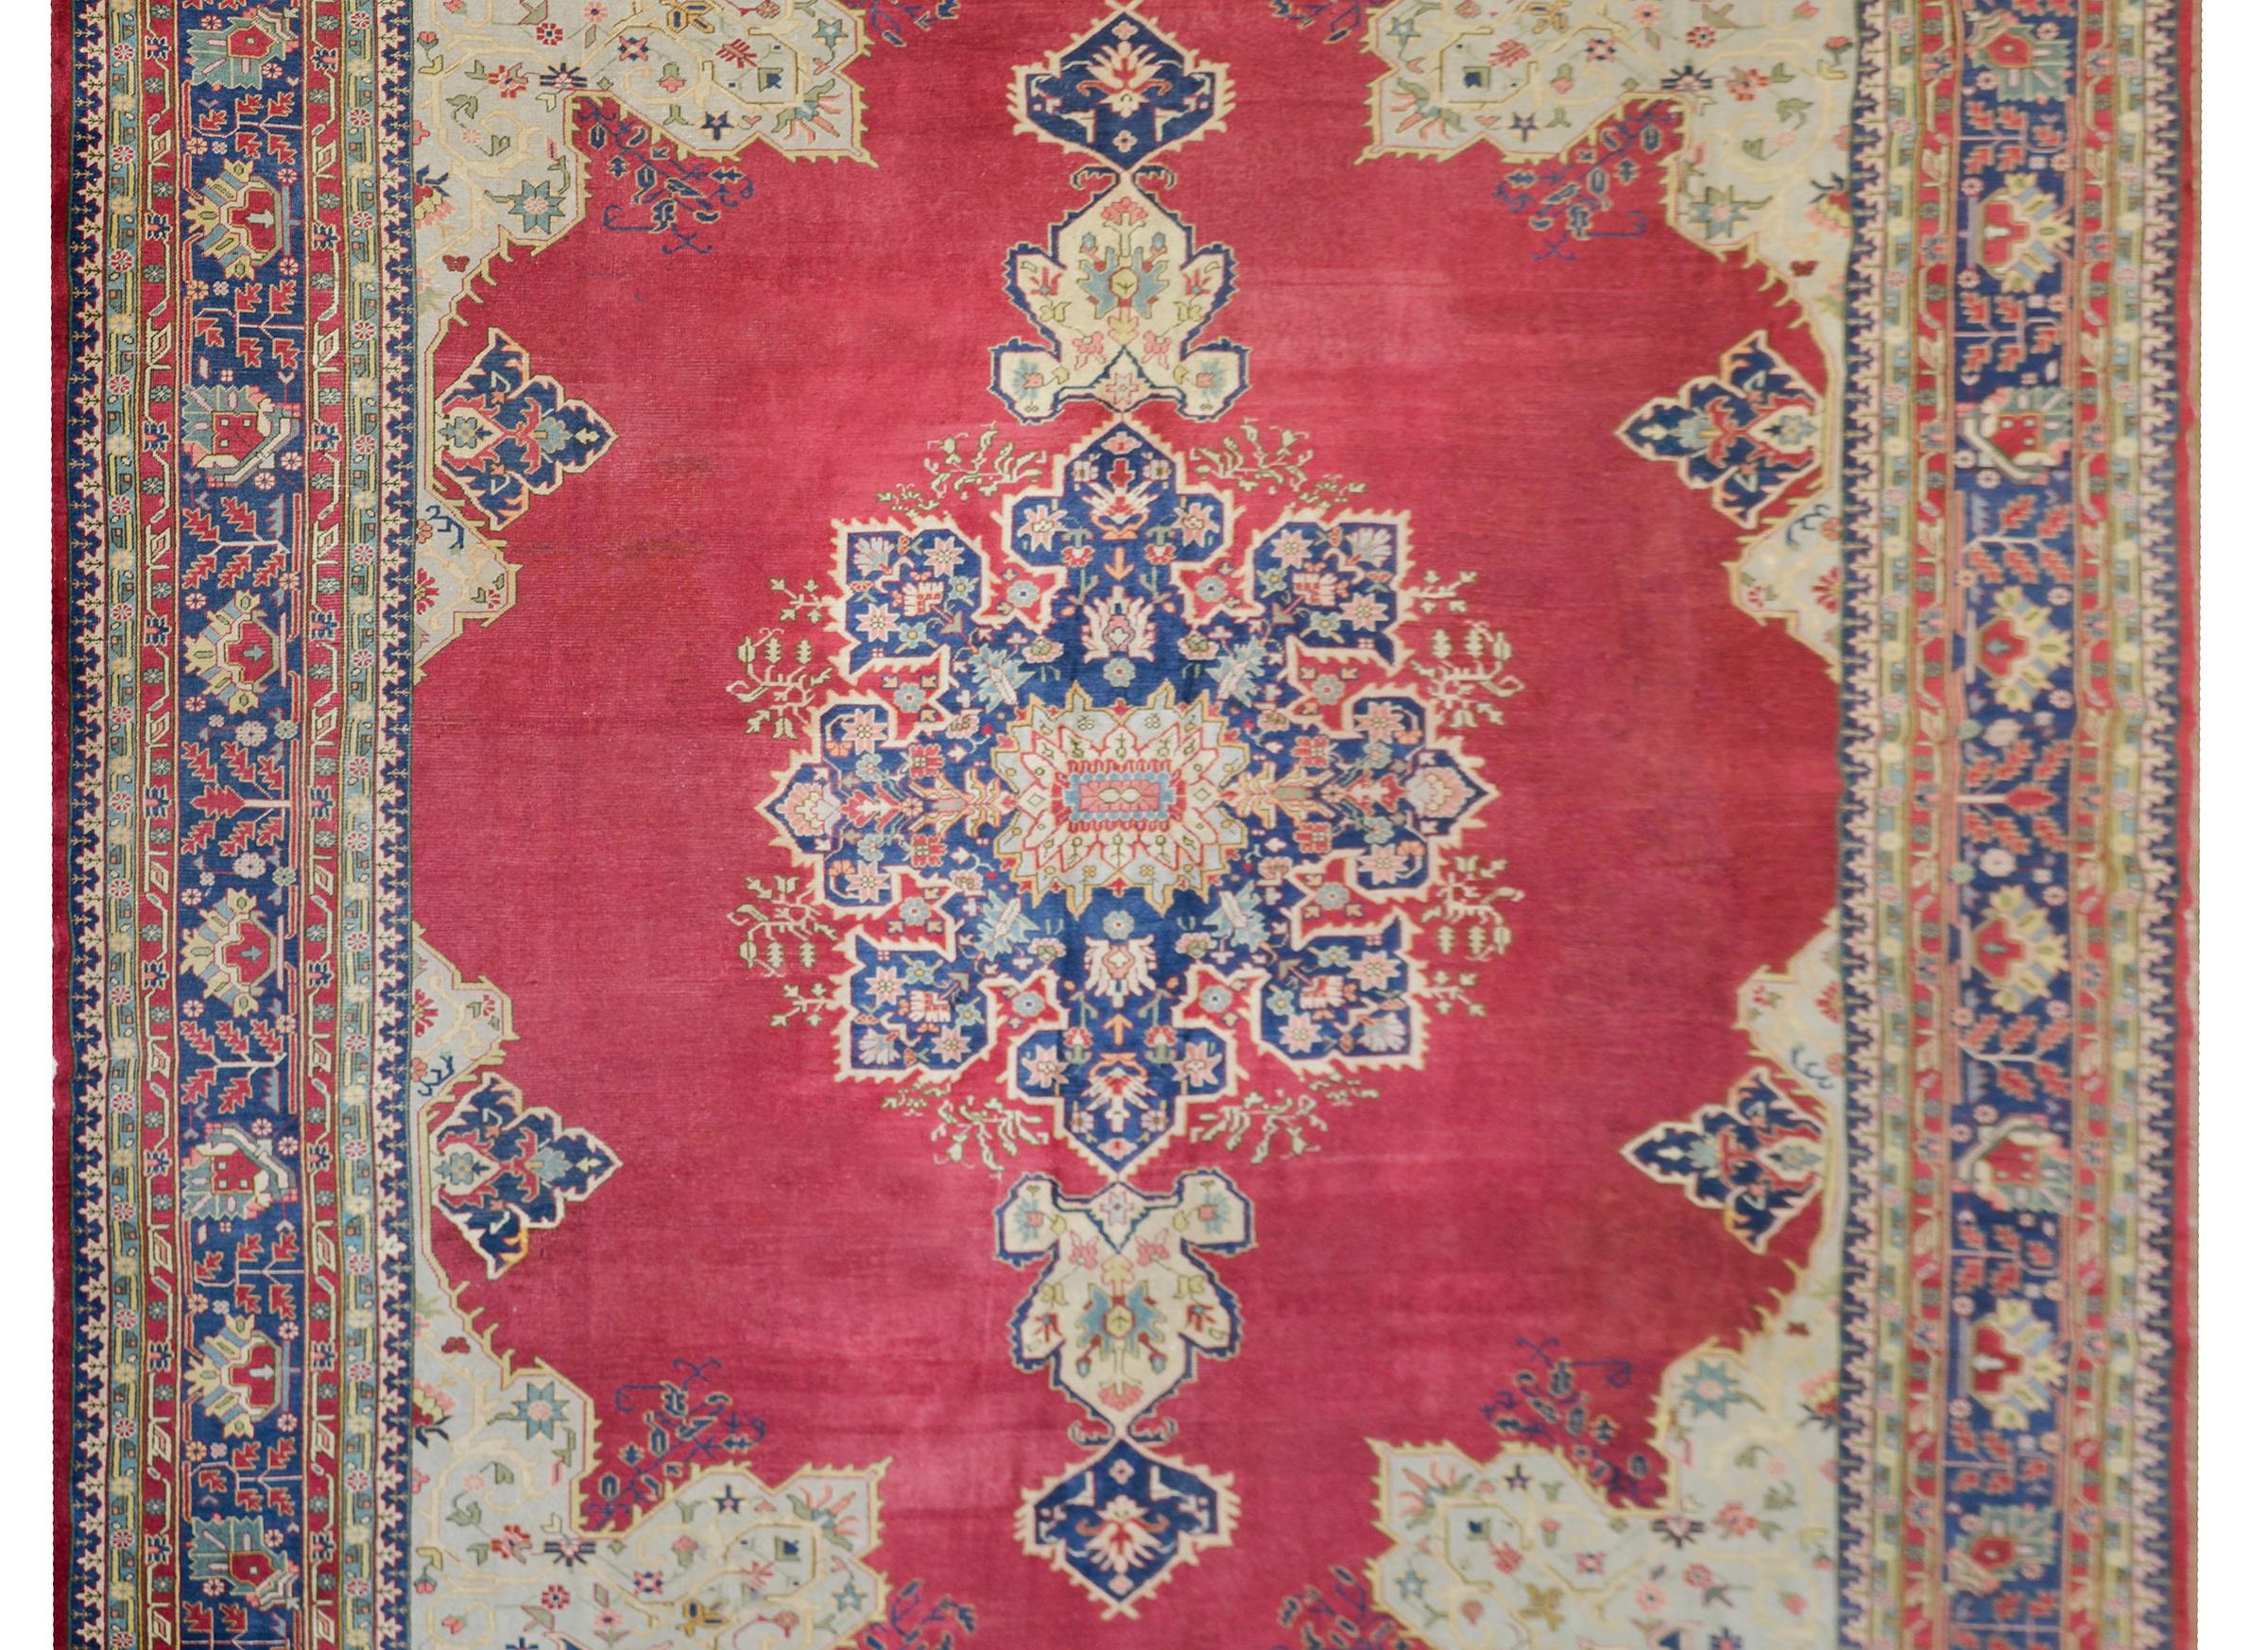 A bold early 20th century Turkish Sparta Serapi rug with a gorgeous large scale eight-lobed floral medallion woven in indigo, pink, and cream, against a rich cranberry field, and surrounded by a wonderful complex floral and petite scrolling vine